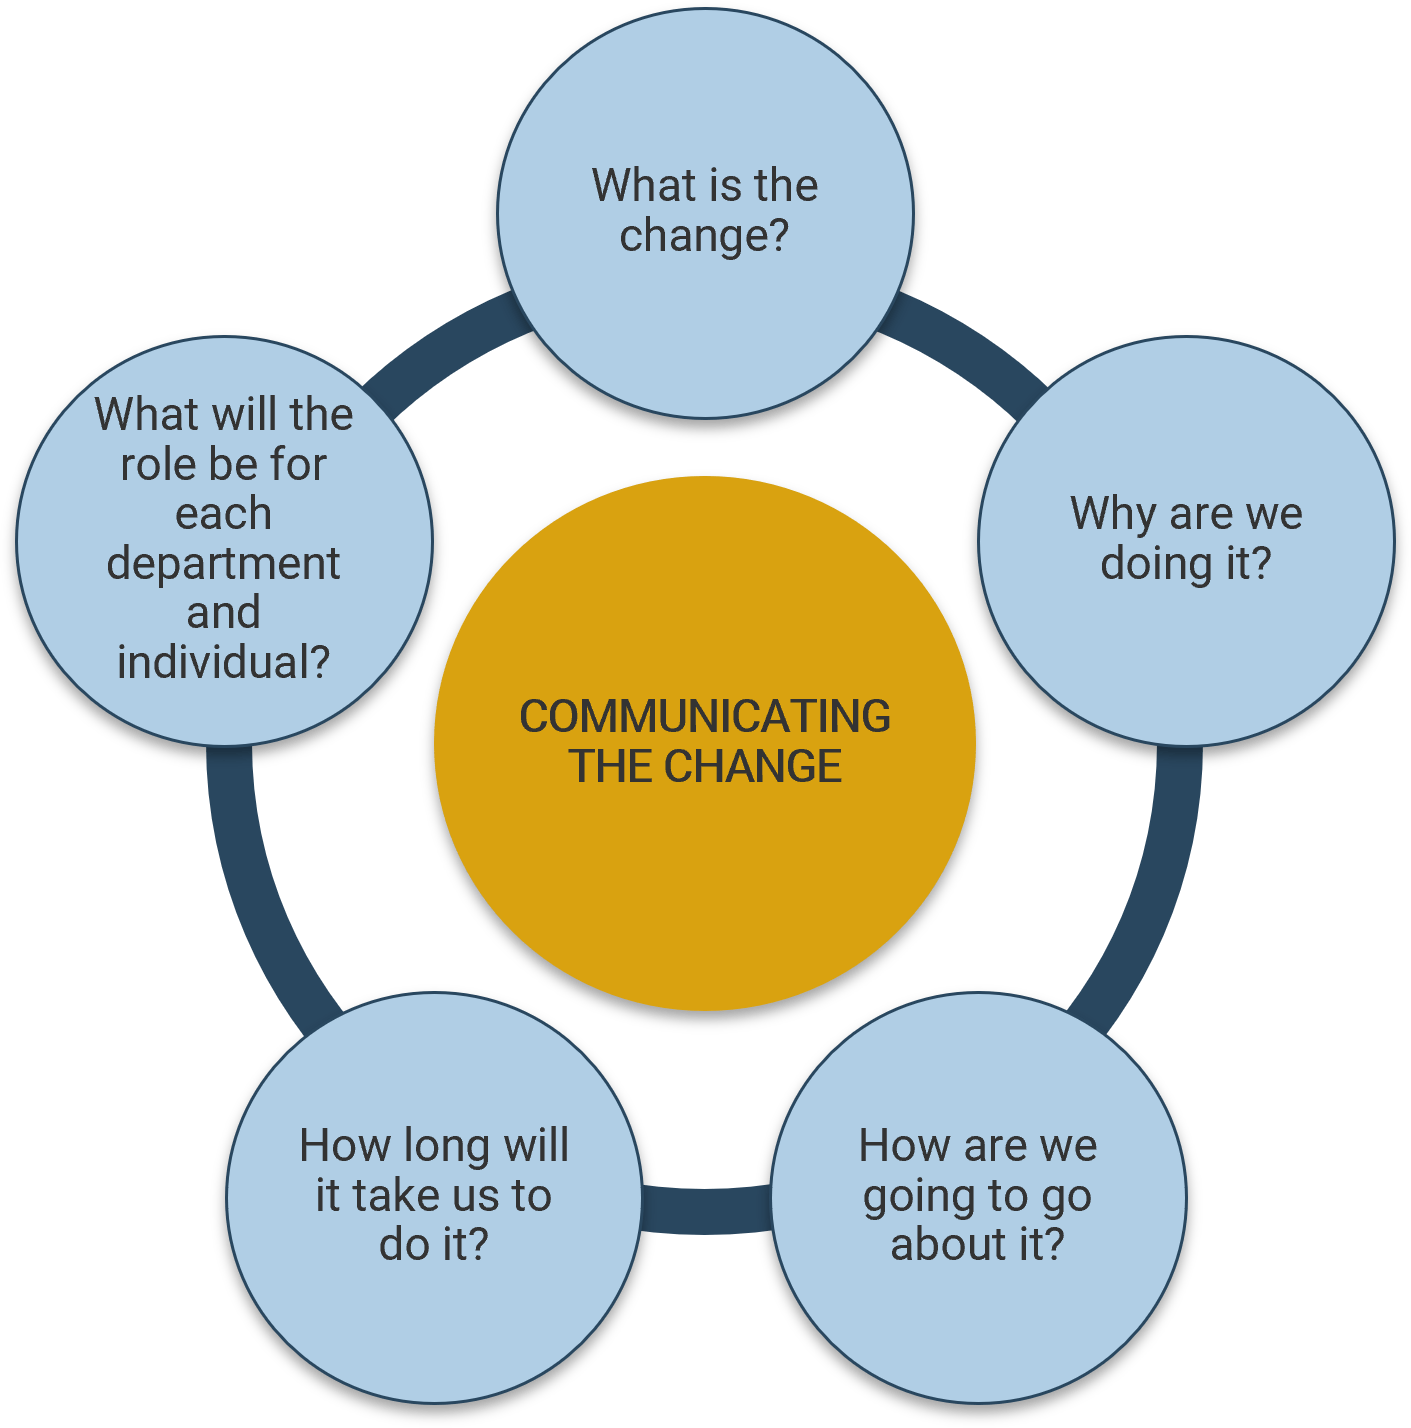 Diagram titled 'COMMUNICATING THE CHANGE' surrounded by useful questions: 'What is the change?', 'What will the role be for each department and individual?', 'Why are we doing it?', 'How long will it take us to do it?', and 'How are we going to go about it?'.